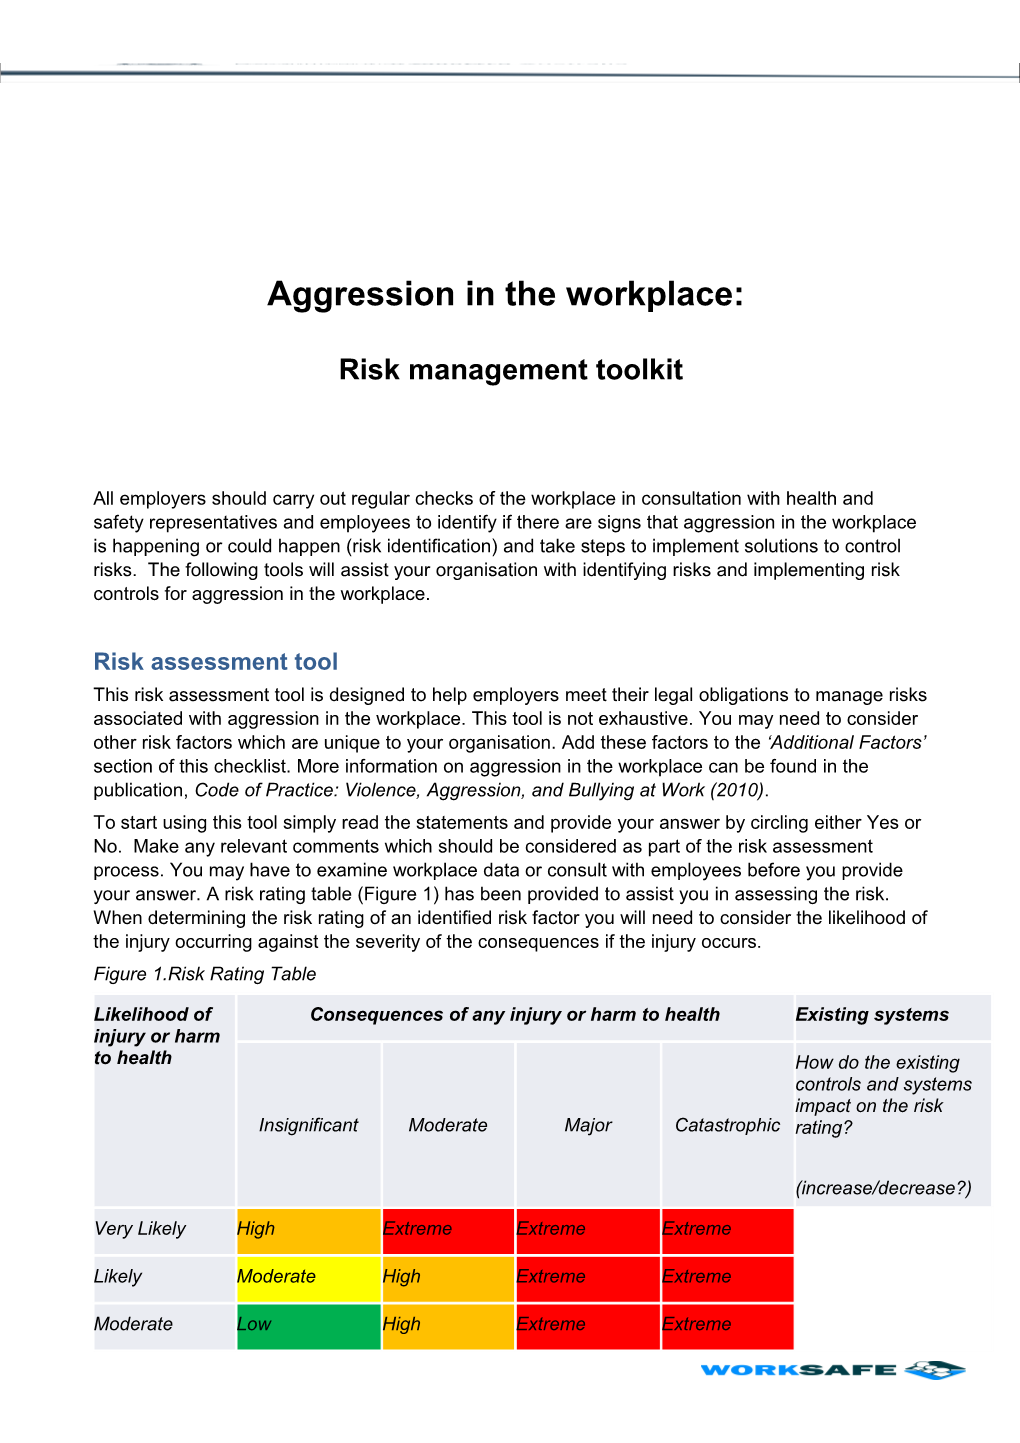 Aggression in the Workplace: Risk Management Toolkit